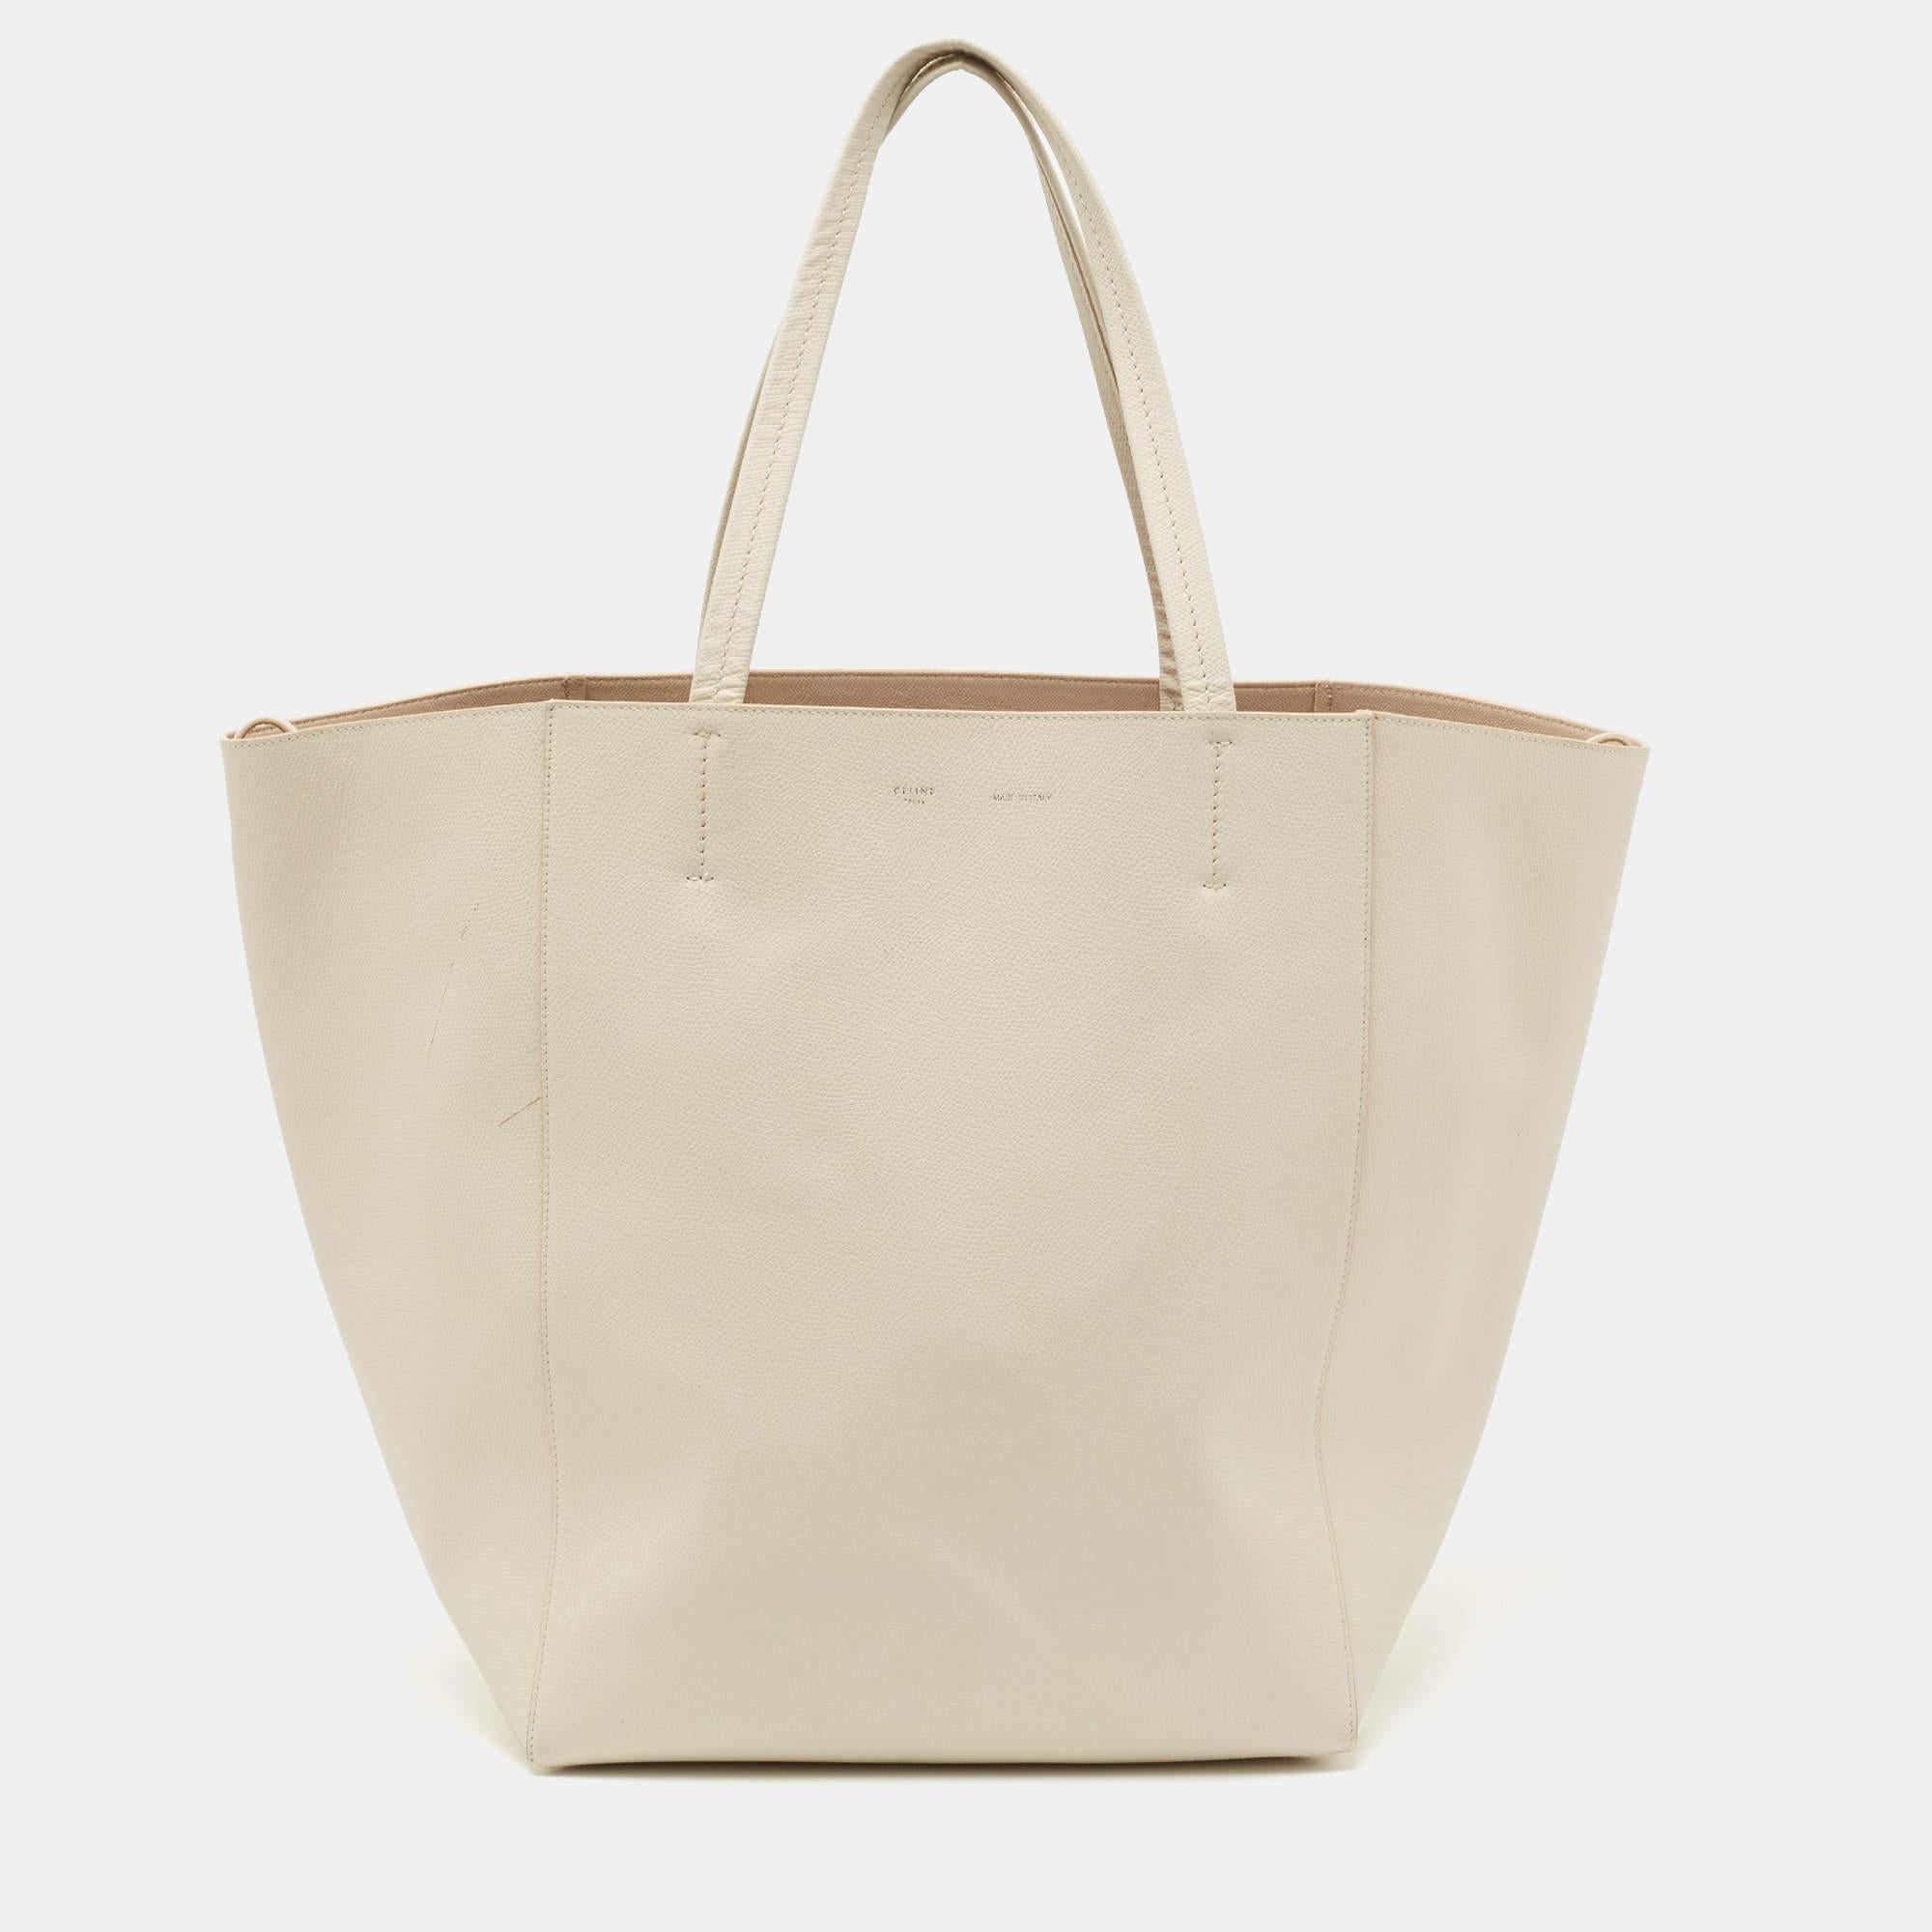 This tote from Celine has been designed to be a worthy style companion! Crafted from leather, the bag features a spacious interior to carry your essentials in.

